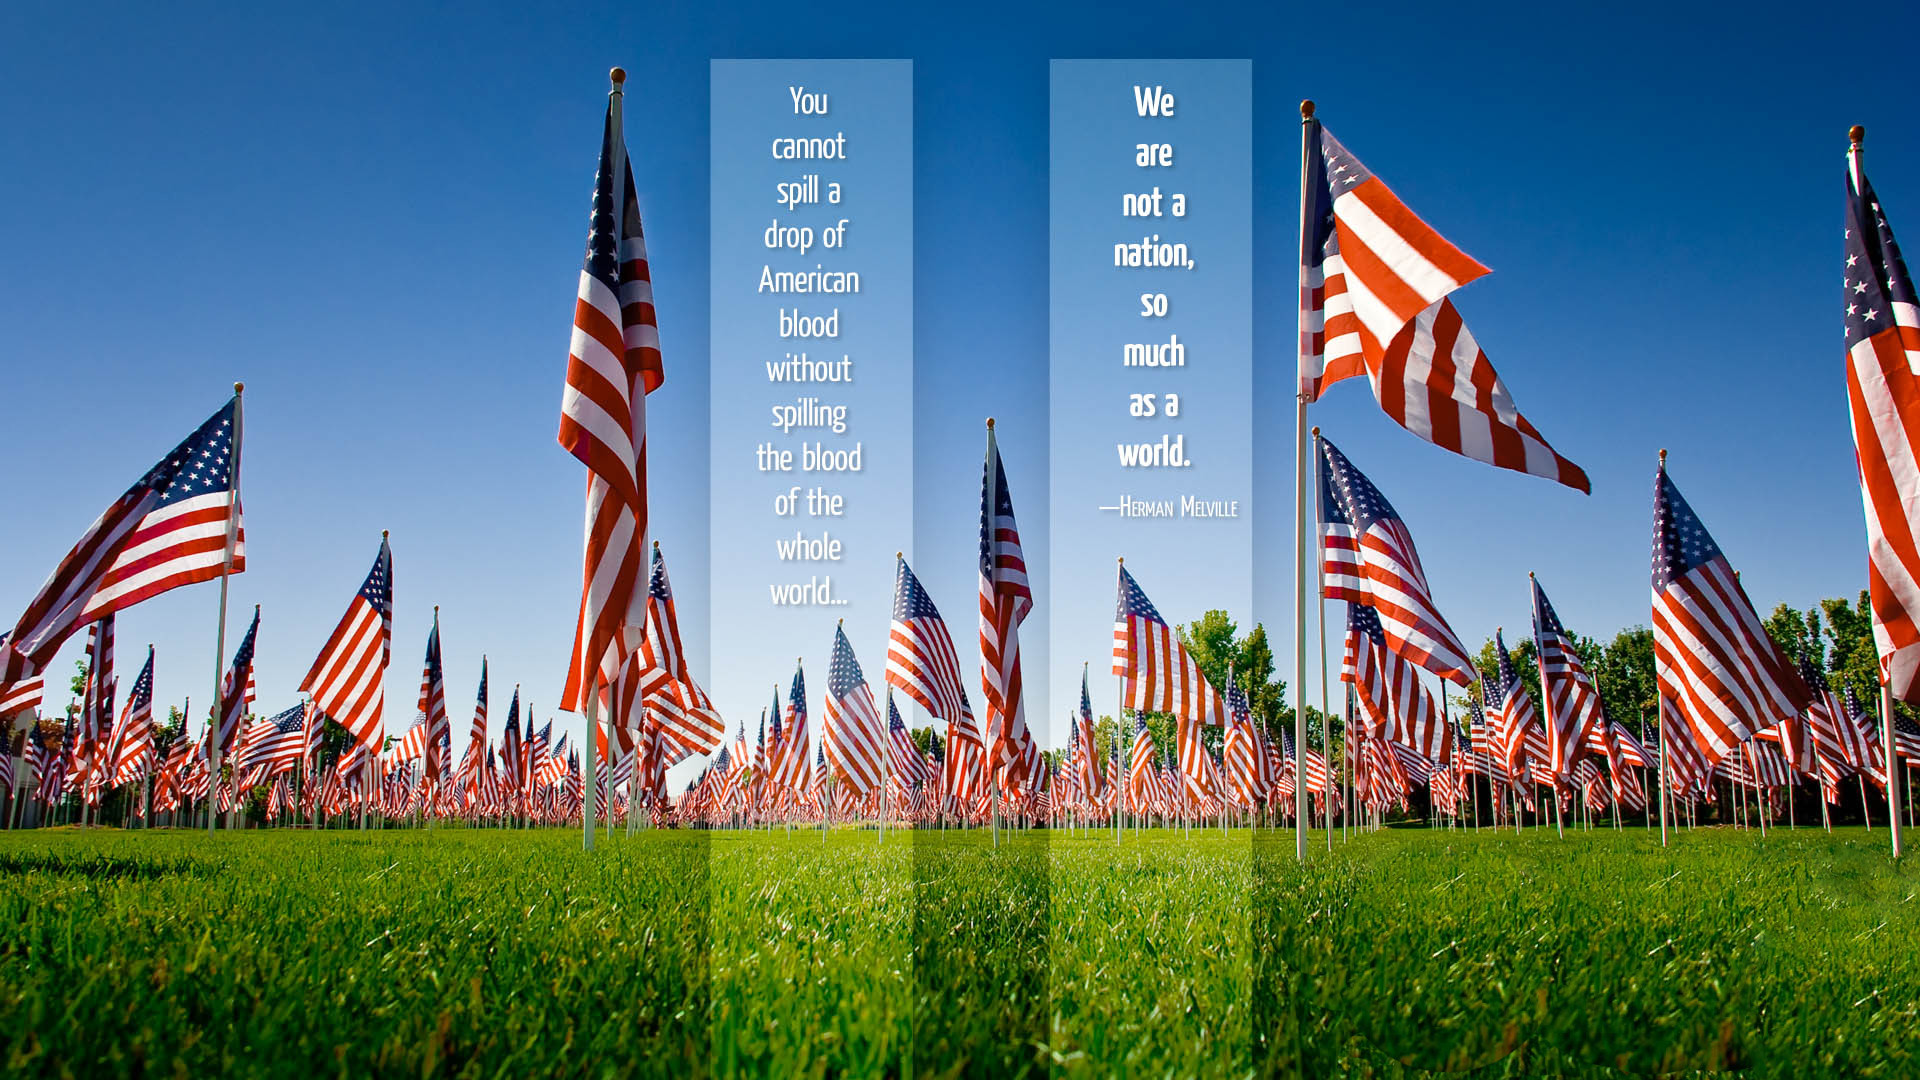 In honor of September 11, here are eight patriotic wallpapers that I .